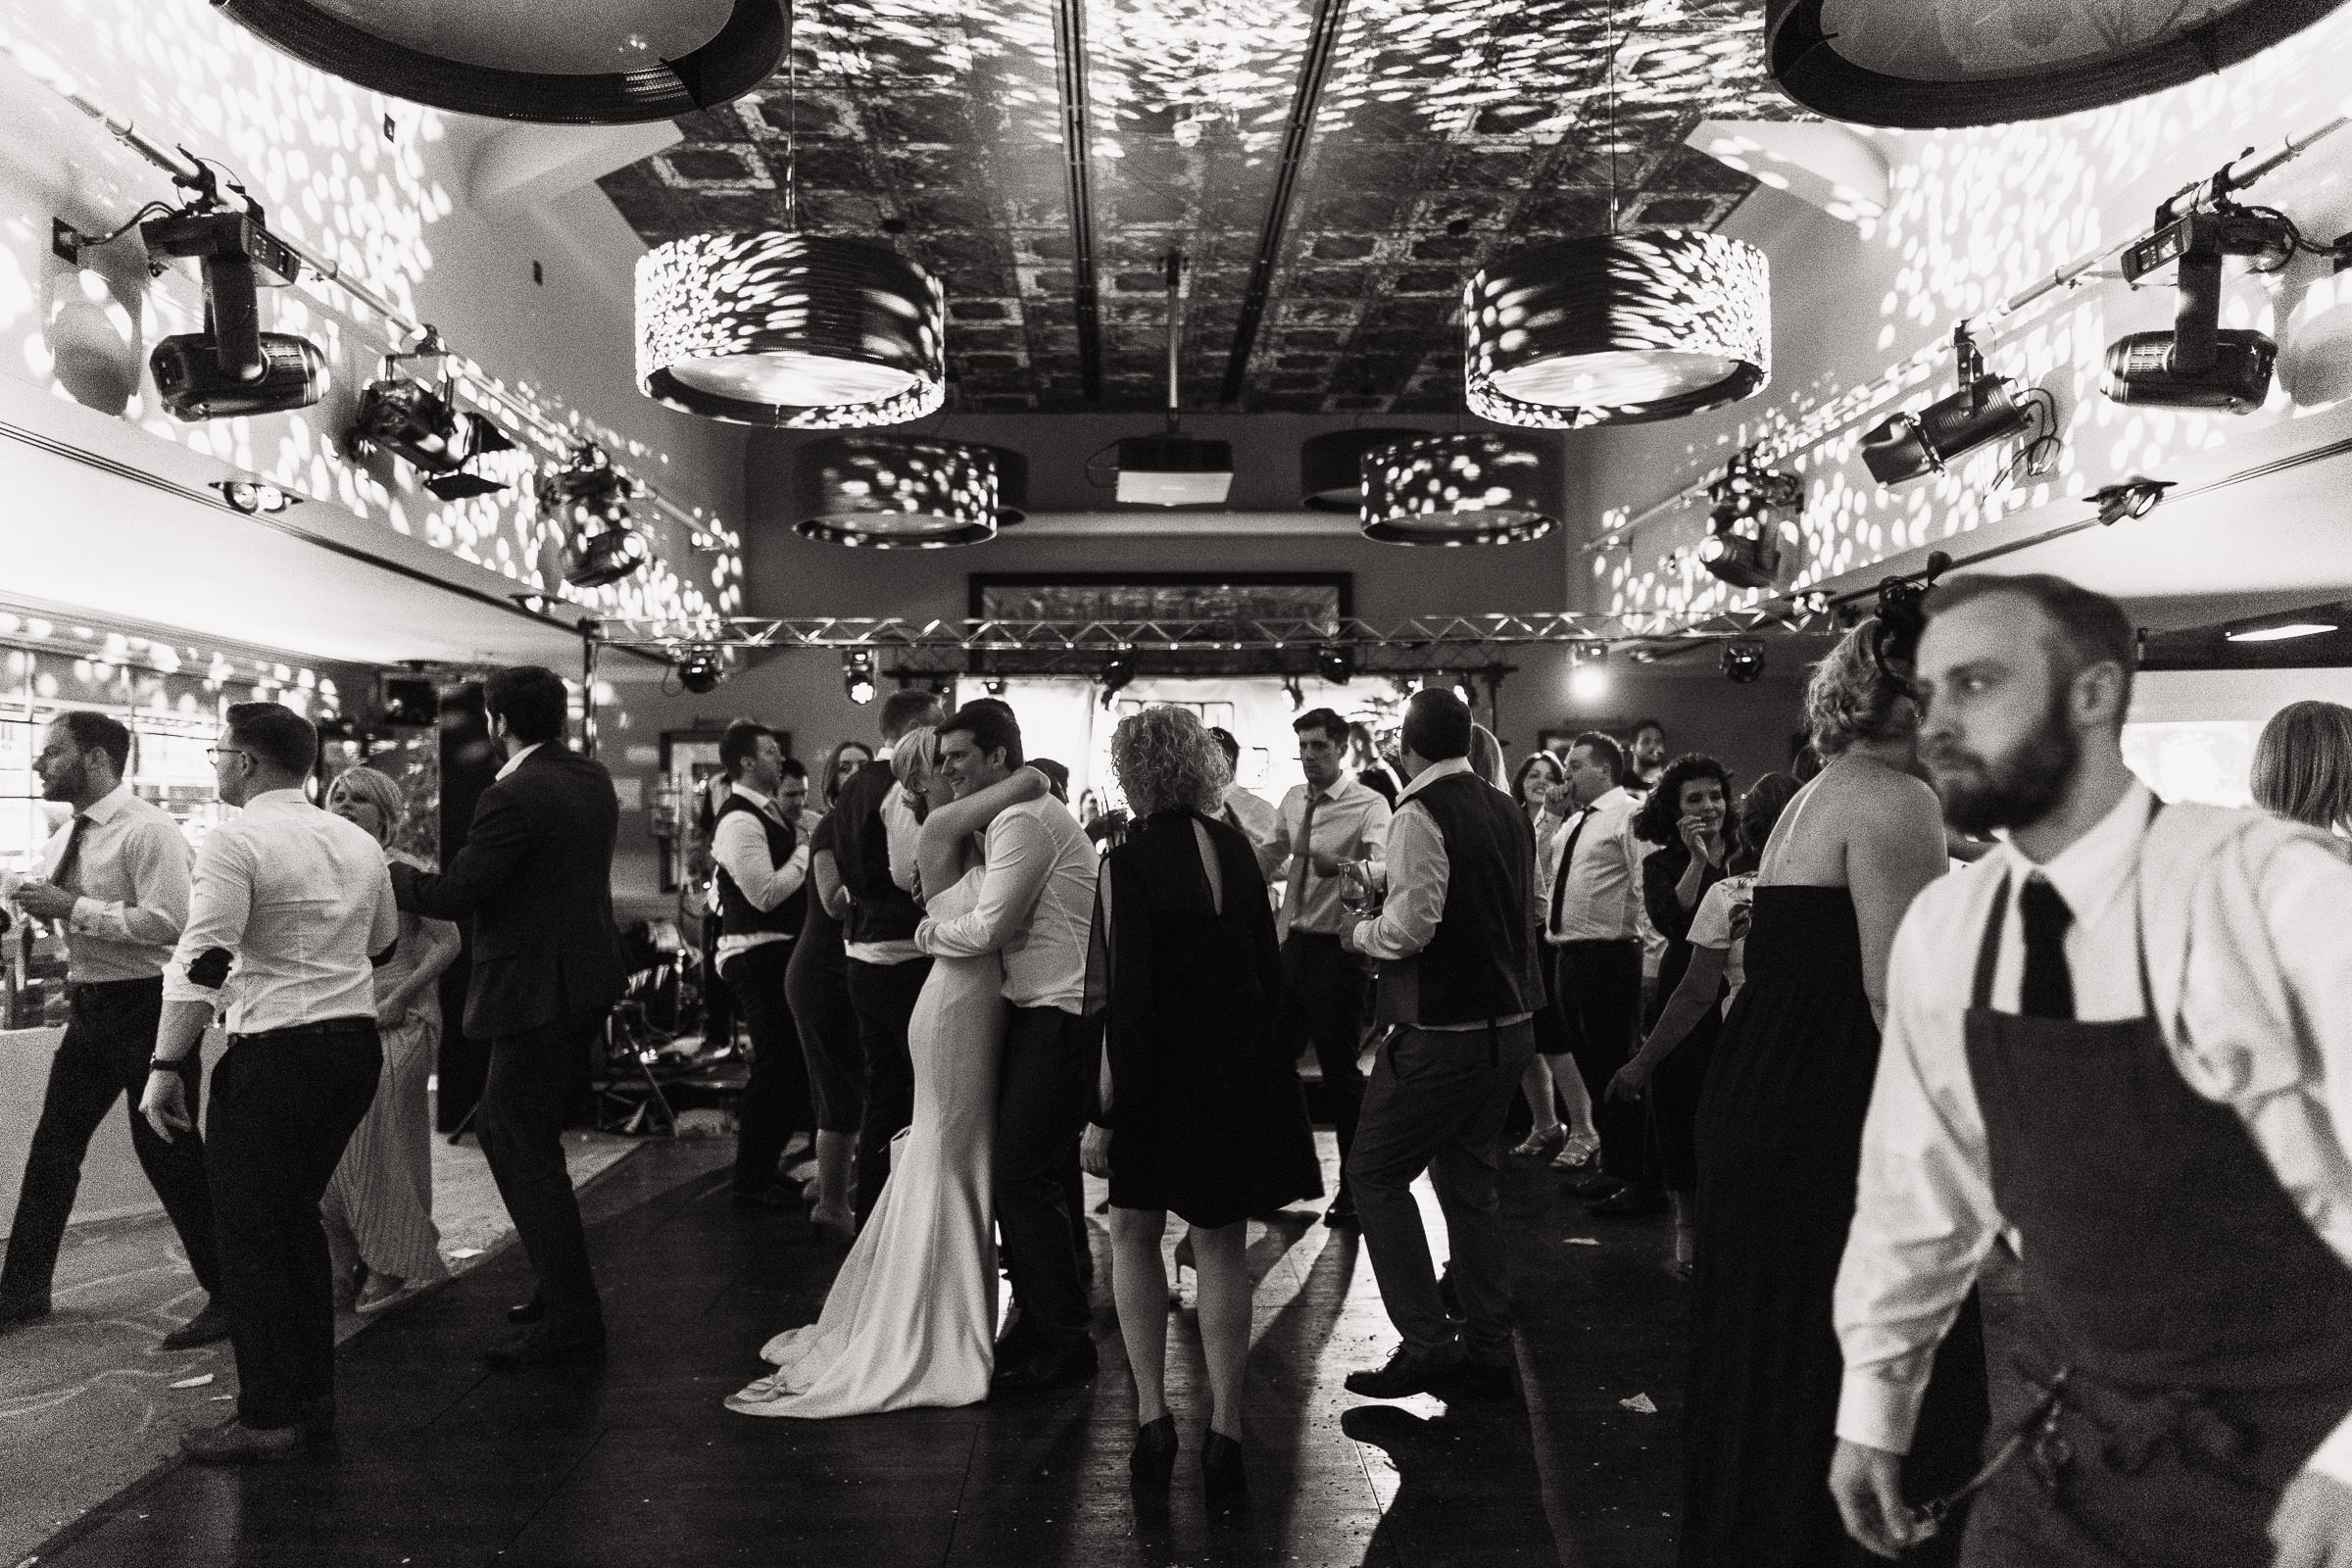 A busy dance floor at The Lion House, a popular Essex wedding venue. Newlyweds dance at the center while a waiter walks by. Located near Chelmsford and conveniently accessible from the A12.